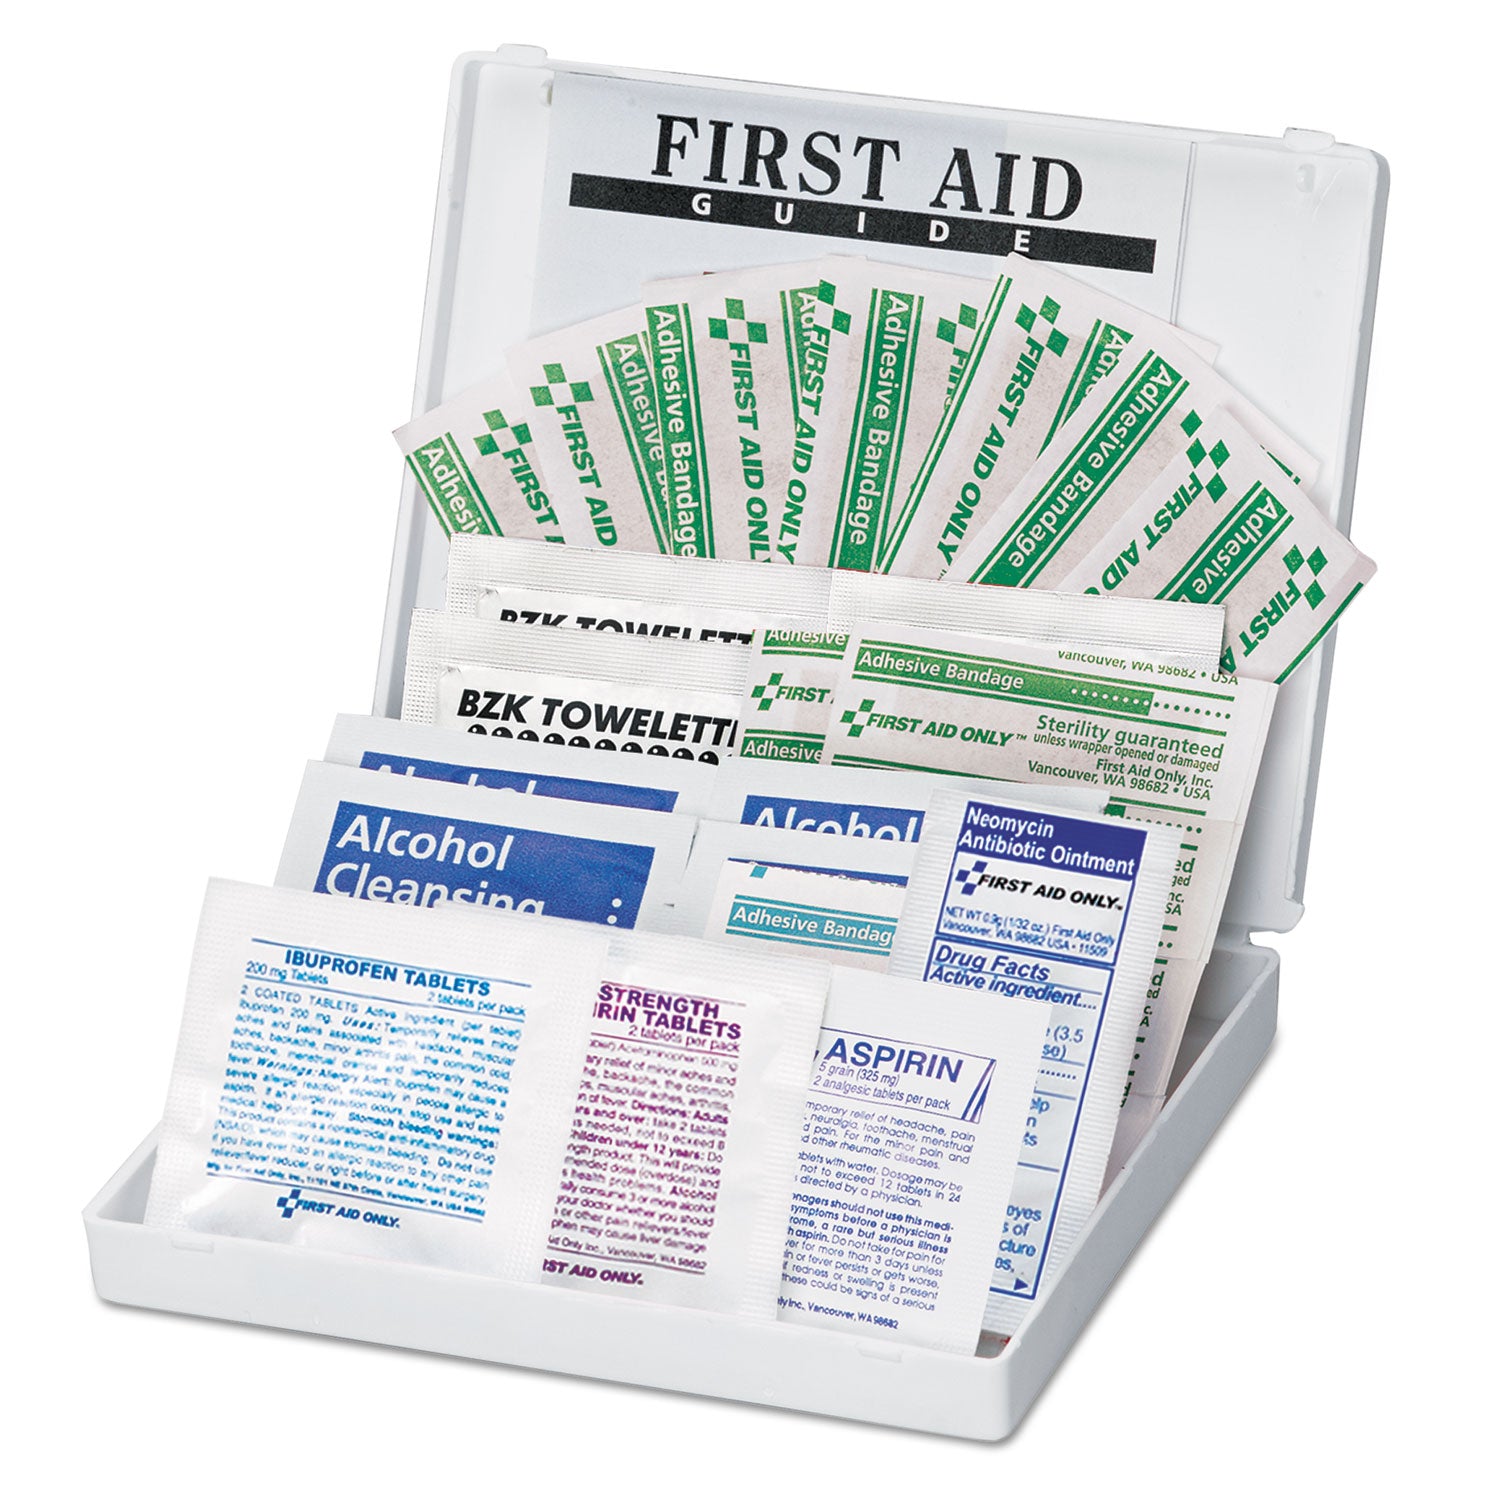 all-purpose-first-aid-kit-34-pieces-374-x-475-34-pieces-plastic-case_fao112 - 2